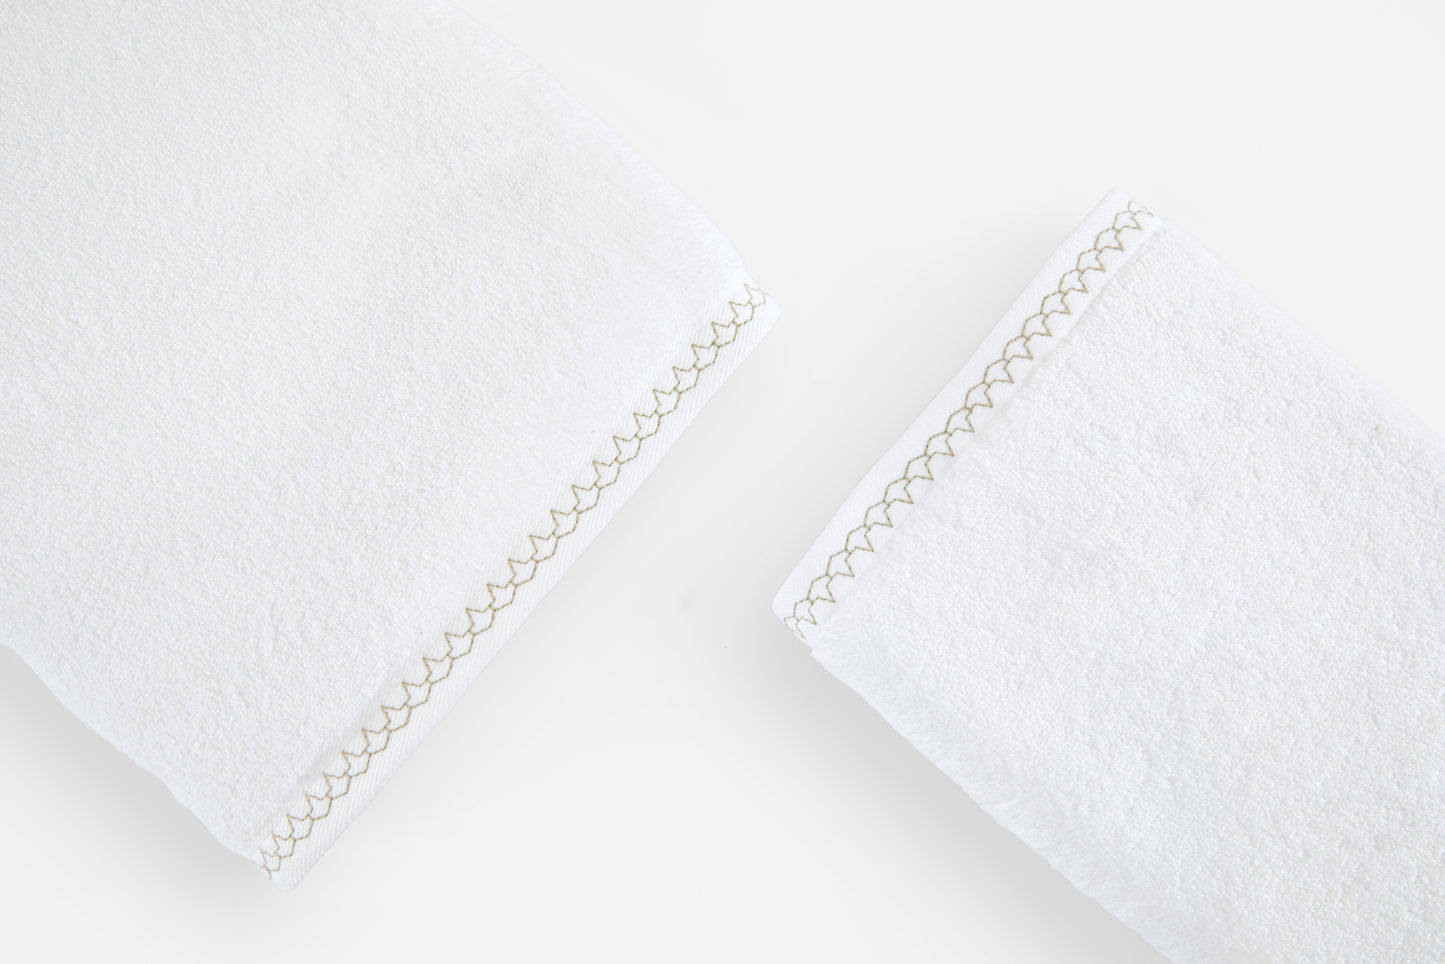 Commune for Hamburg House White Hex Bath and Hand Towels